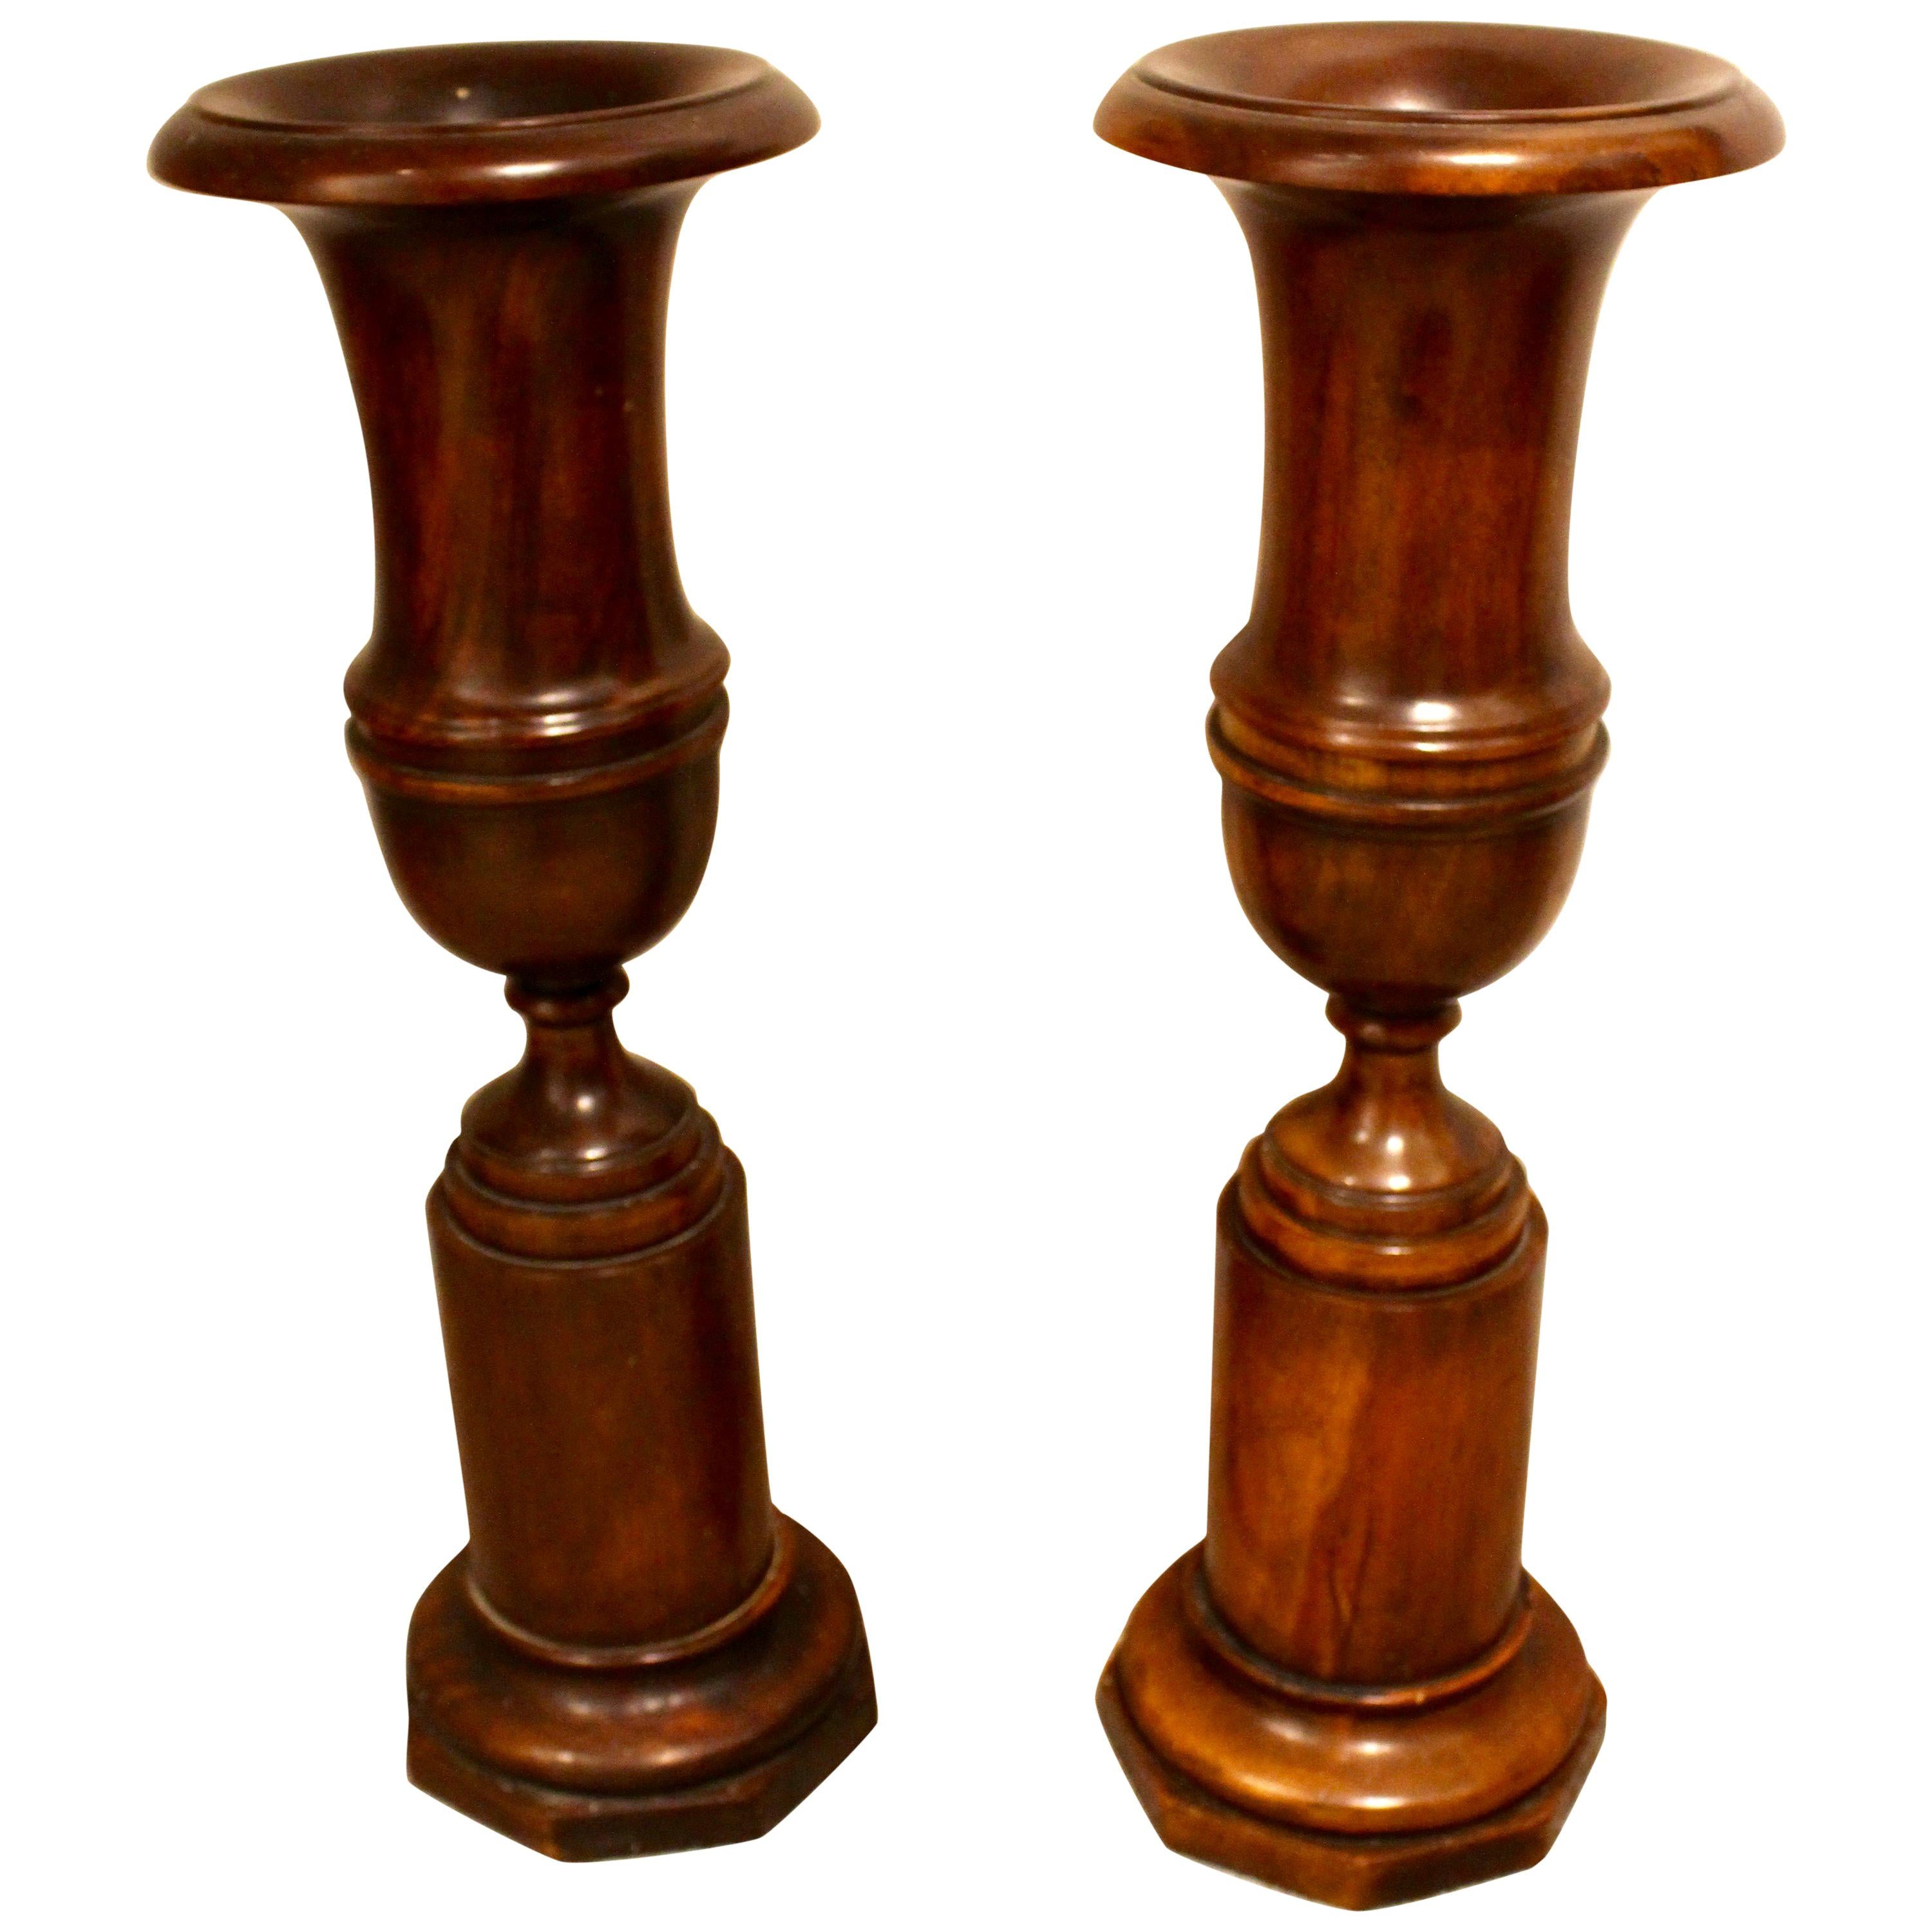 Pair of Large Mahogany Classical Campana Urns For Sale